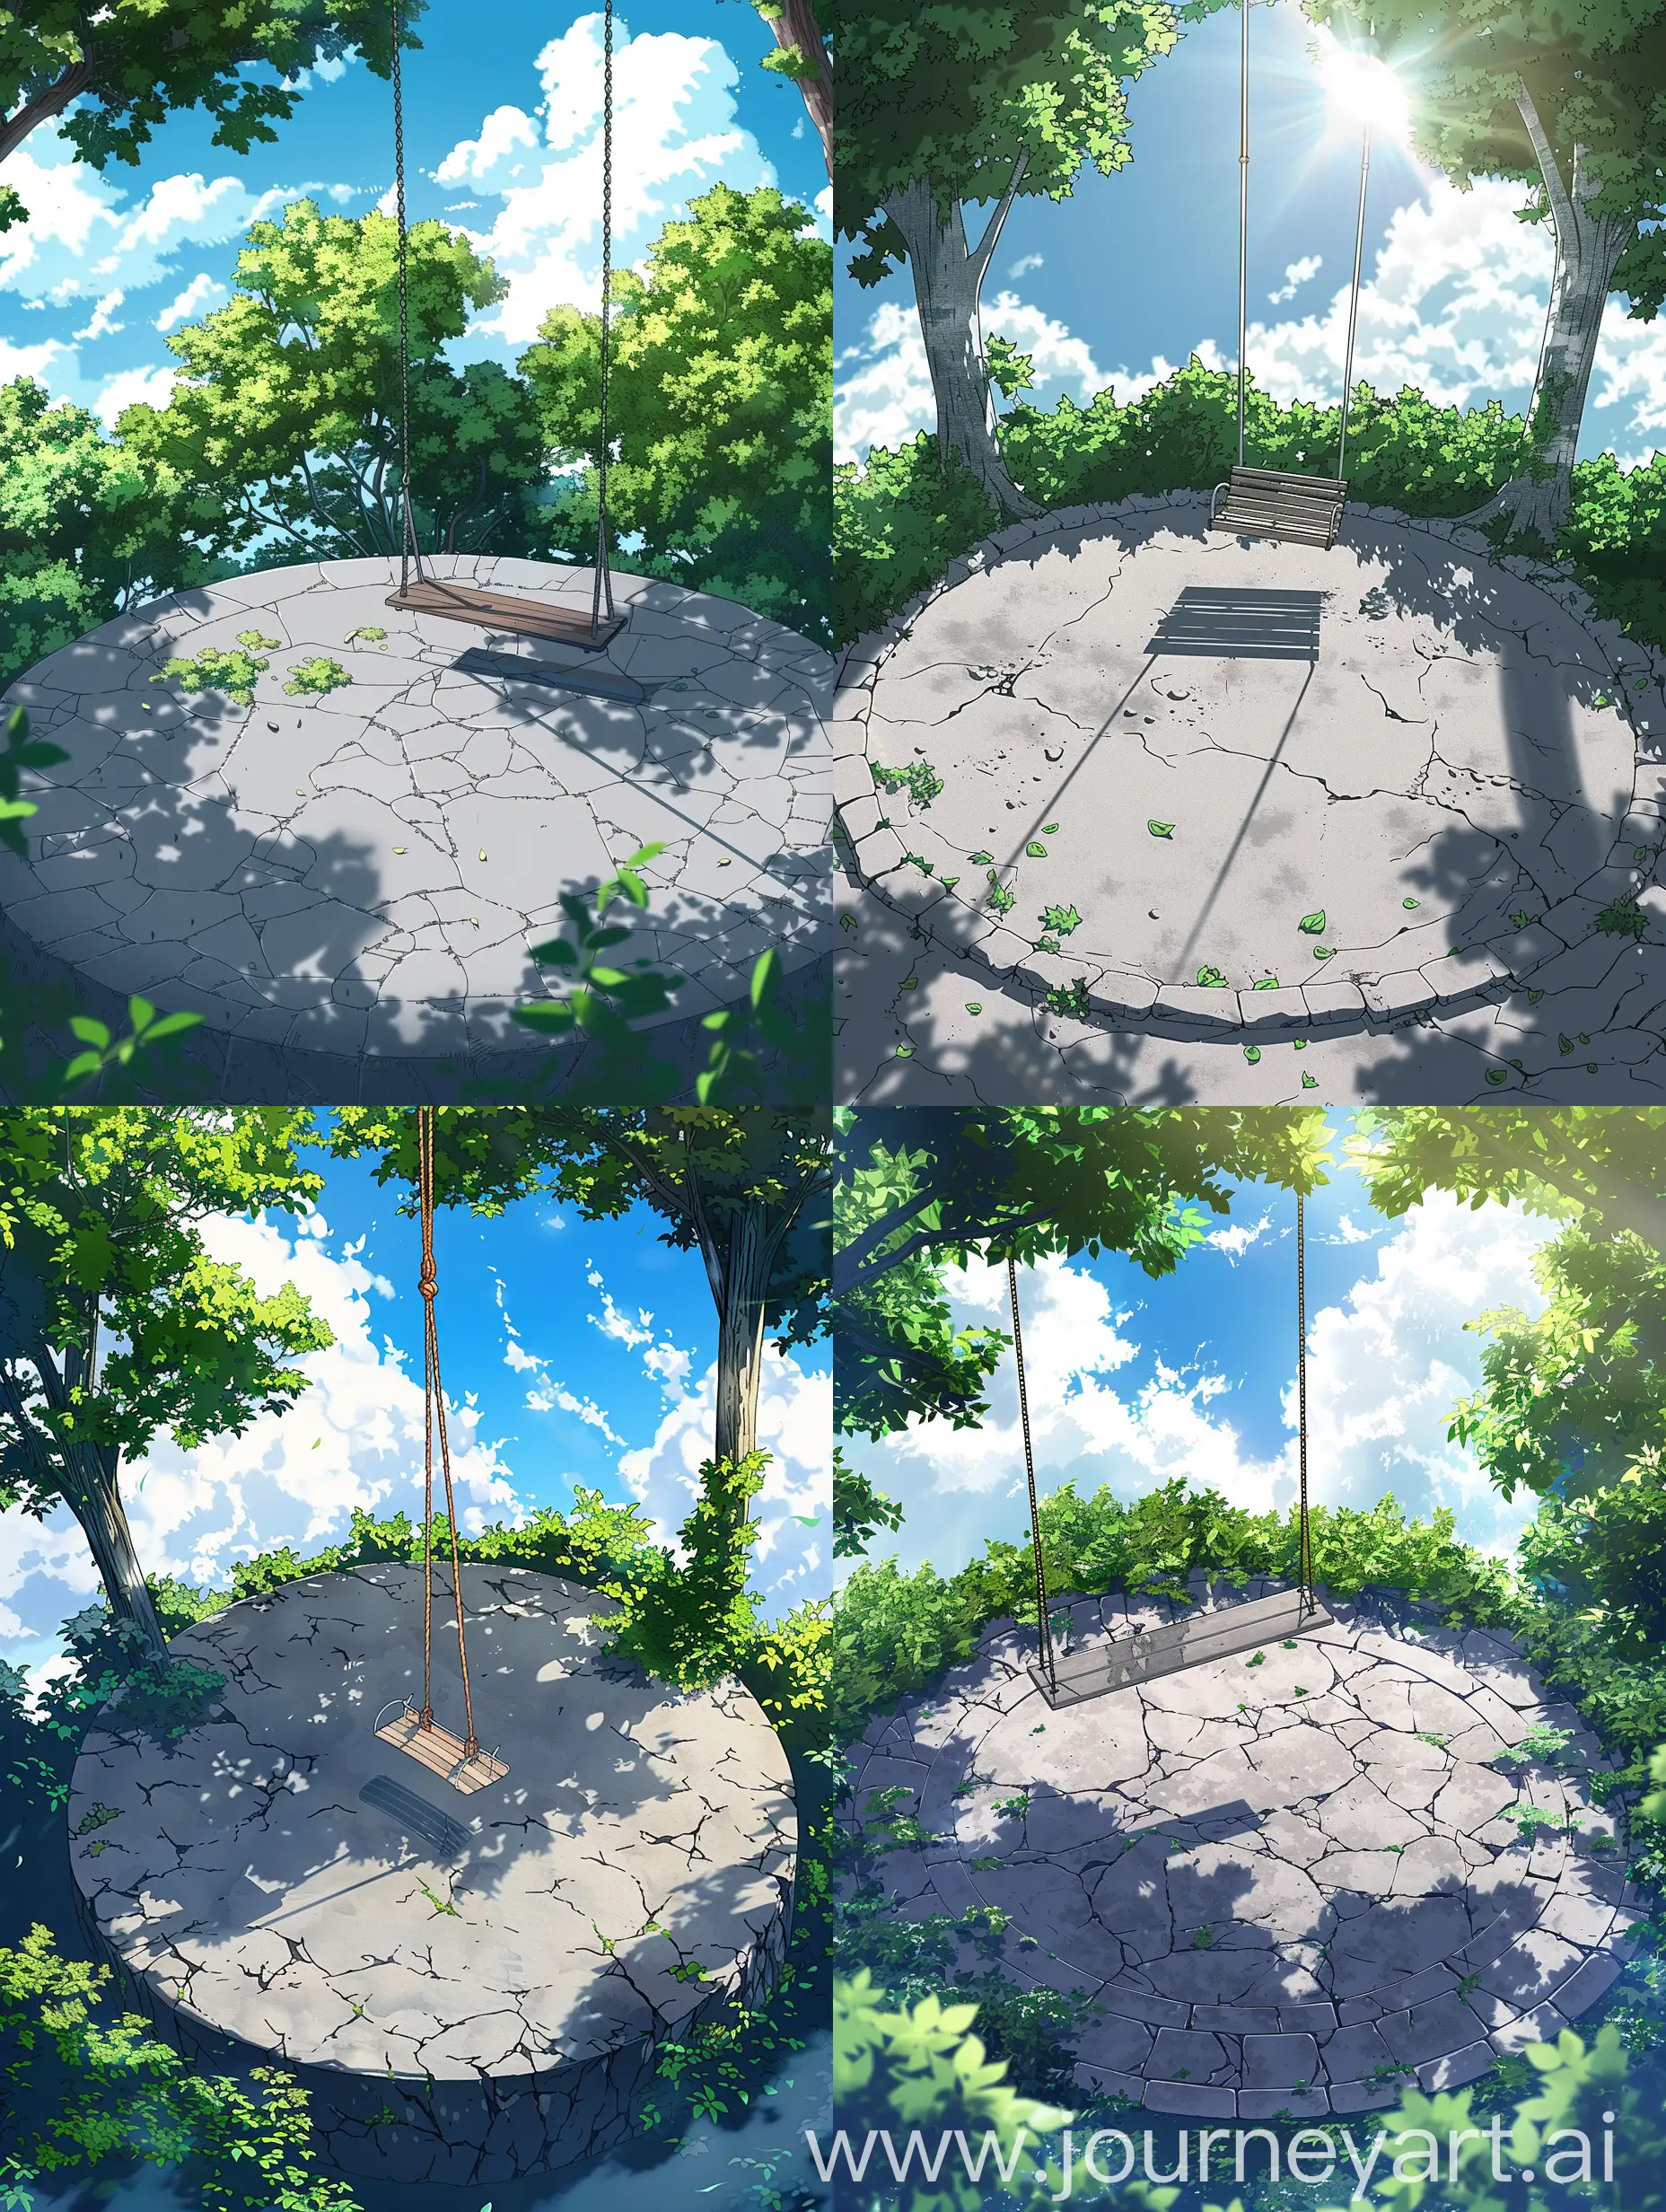 A swing is located on a large circular spot made of gray stones.  The gray spot is surrounded by green trees, and some green leaves are around the swing in the ground patch.  Sunshine, blue sky, white clouds, anime style.